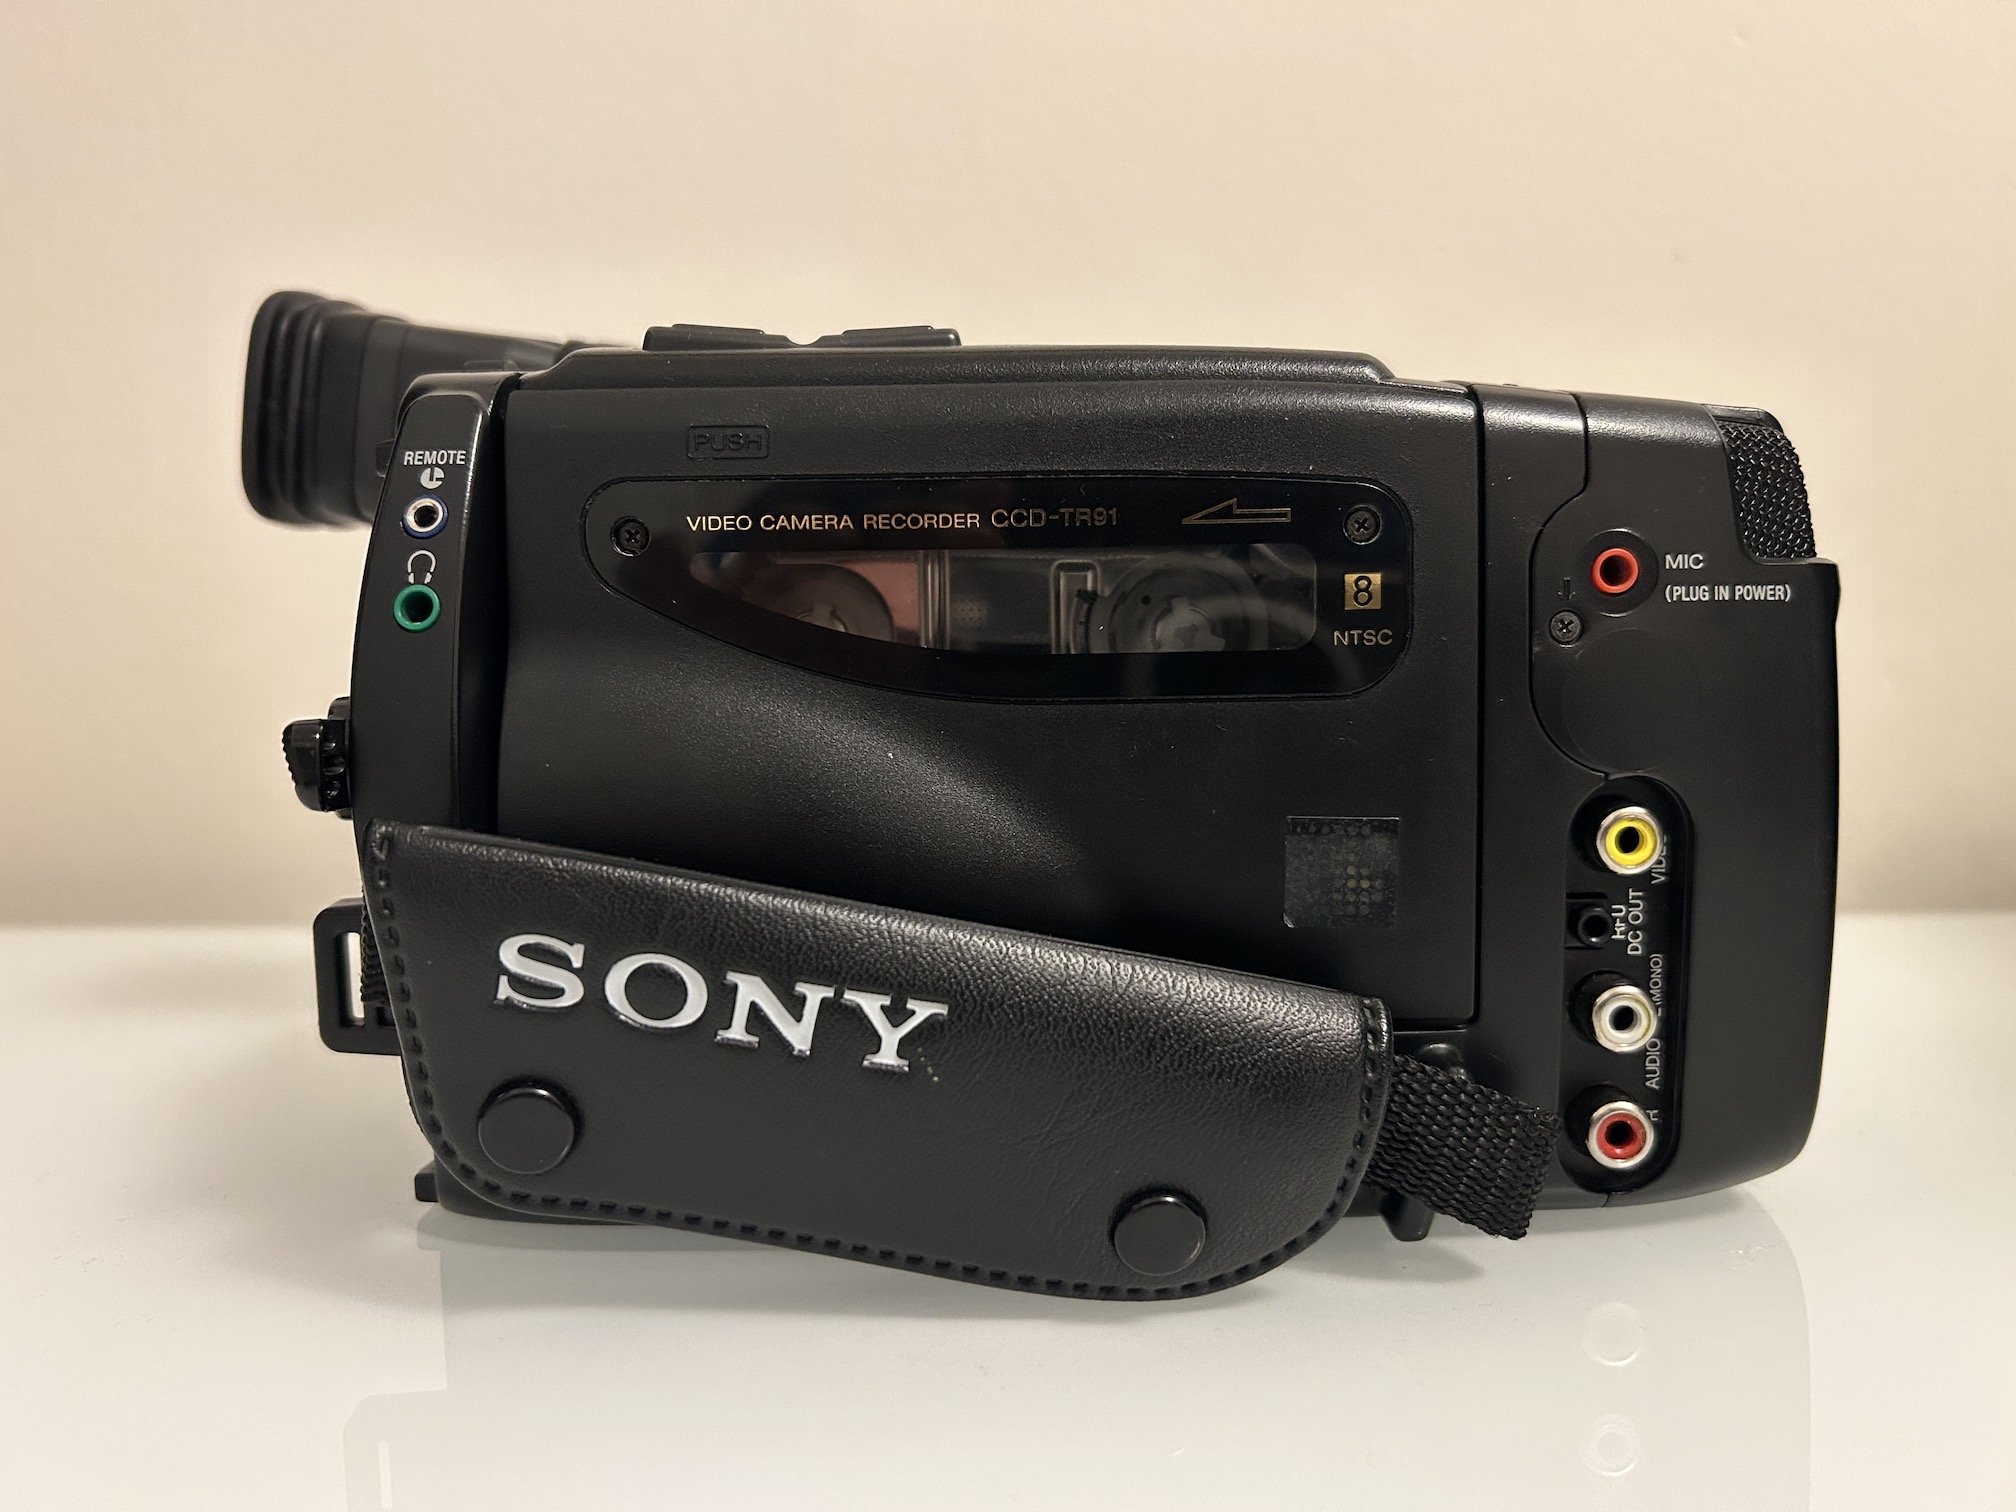 Sony CCD-TR91 left side view